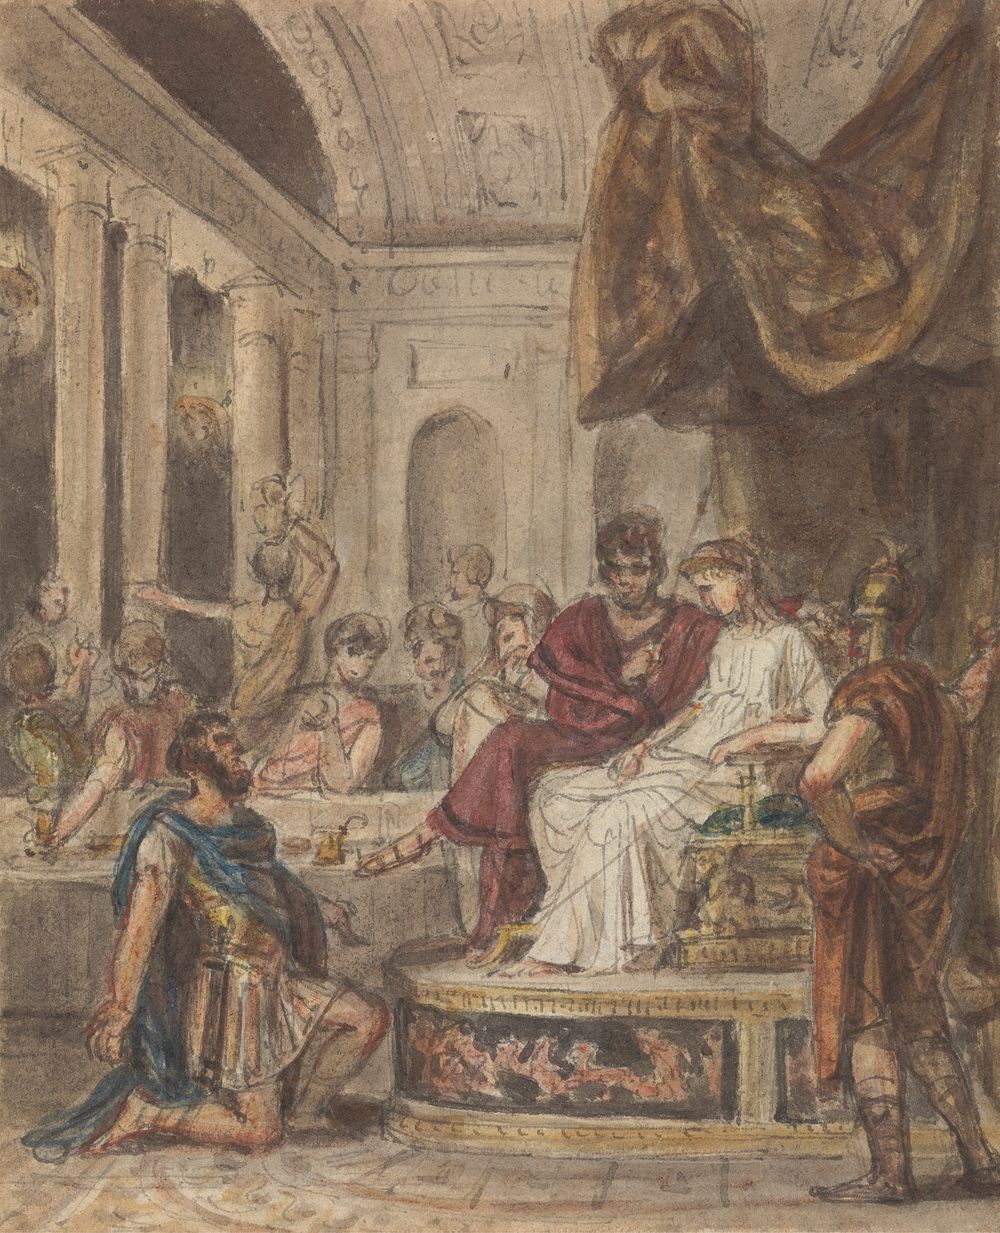 Banquet Scene, with a Roman Soldeir Kneeling to a Famale Figure Sitting on a Throne by Robert Smirke